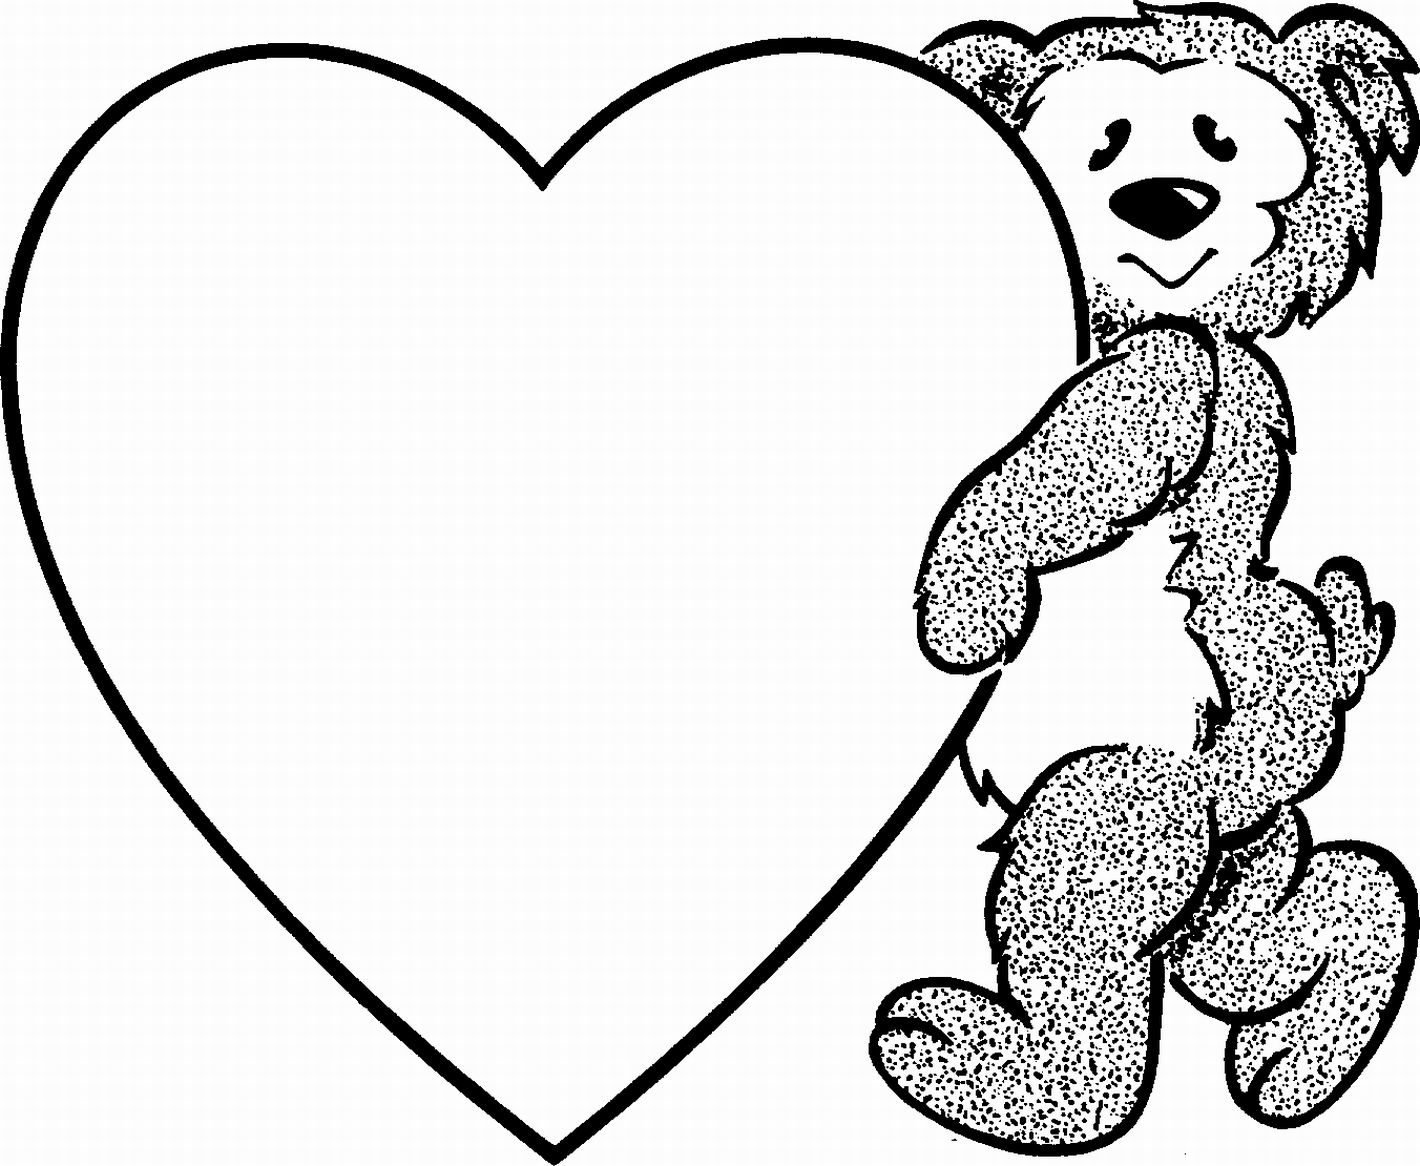 Cute Teddy Bear Backgrounds - Valentine Coloring Pages For Kids Printables - HD Wallpaper 